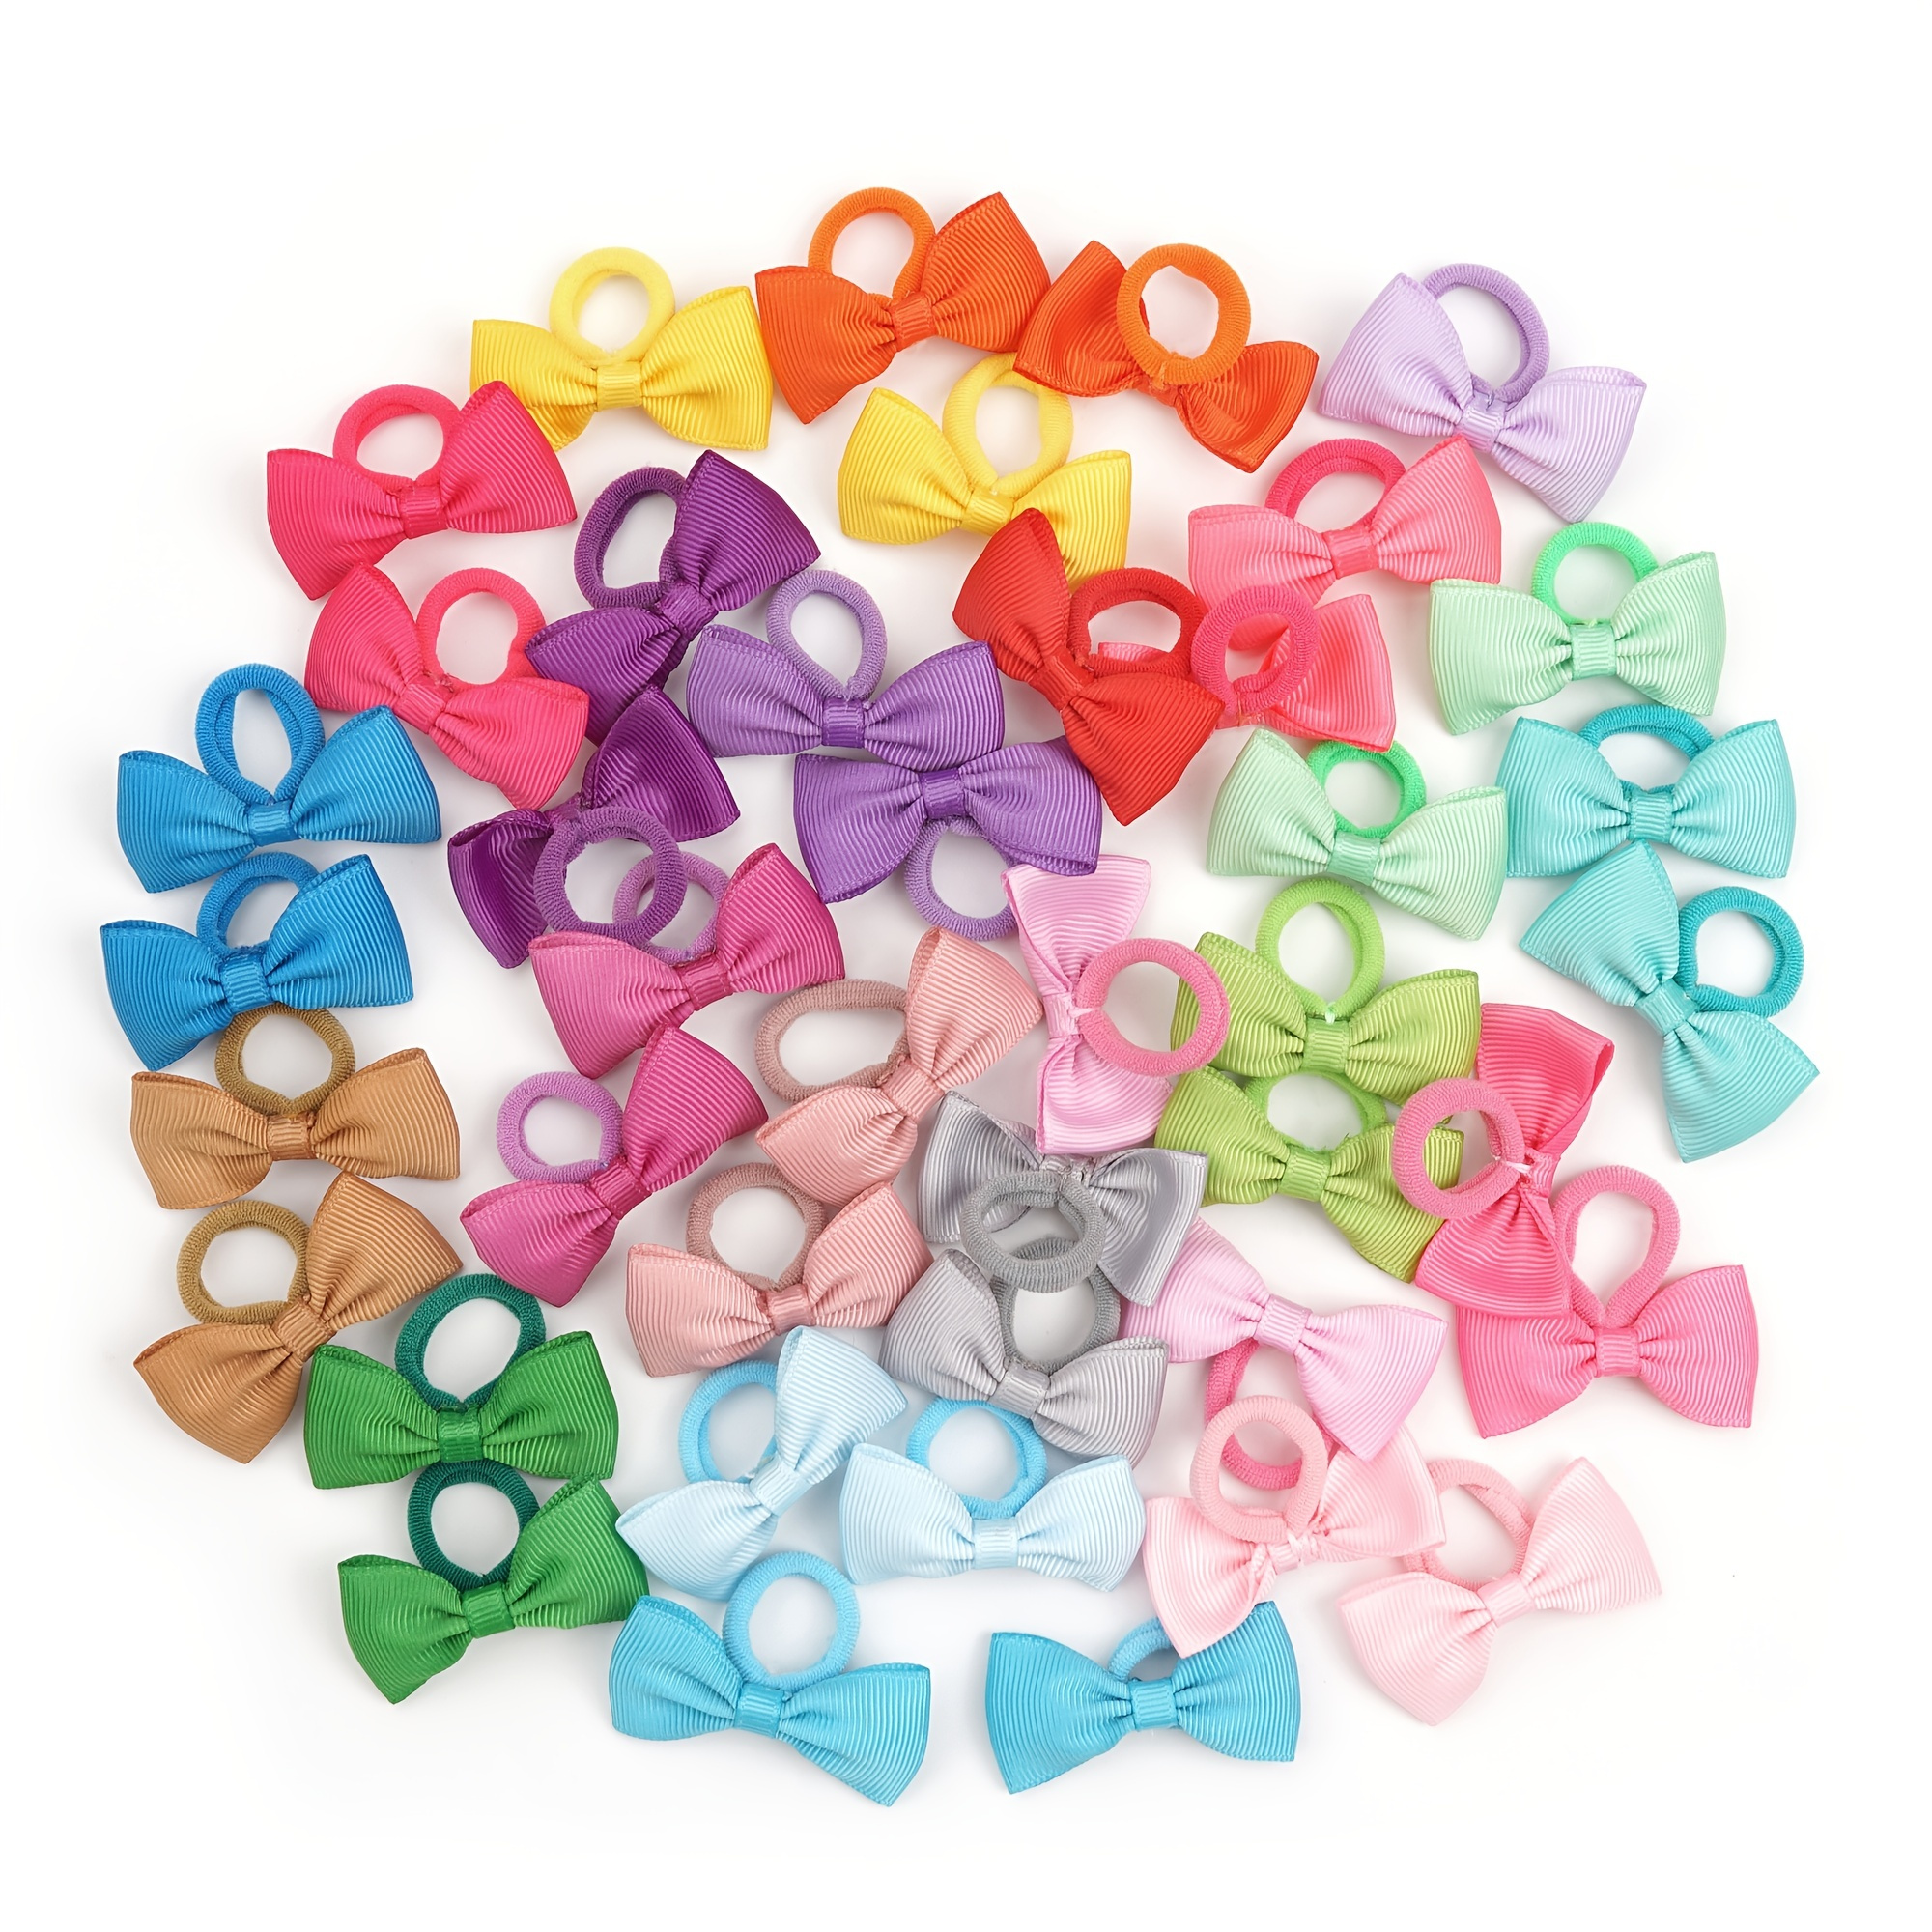 

80pcs Tiny Hair Ties With Bows Bows Rubber Bands Hair Ties Soft Elastics Ponytail Holders Hair Accessories For Girls